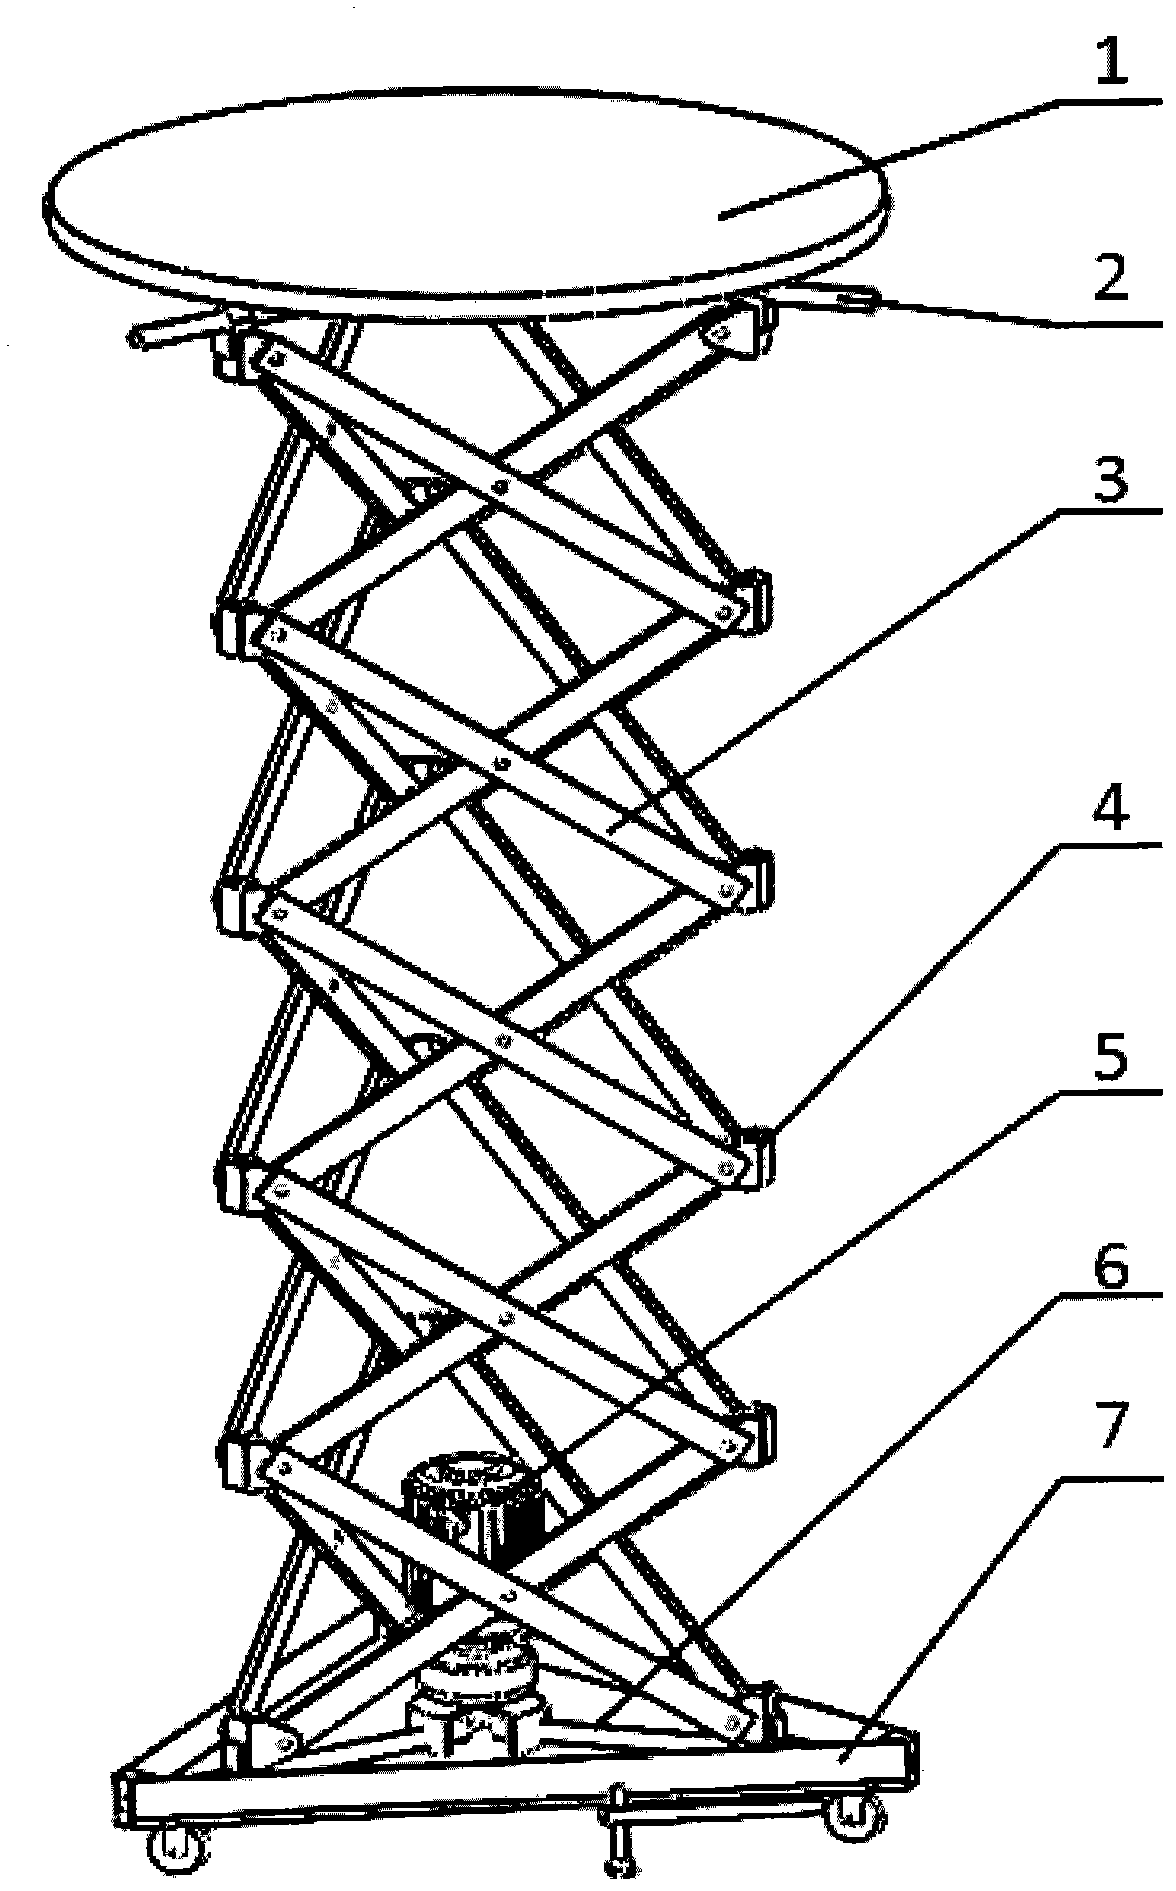 Three-face over-constrained scissor-type lifting mechanism